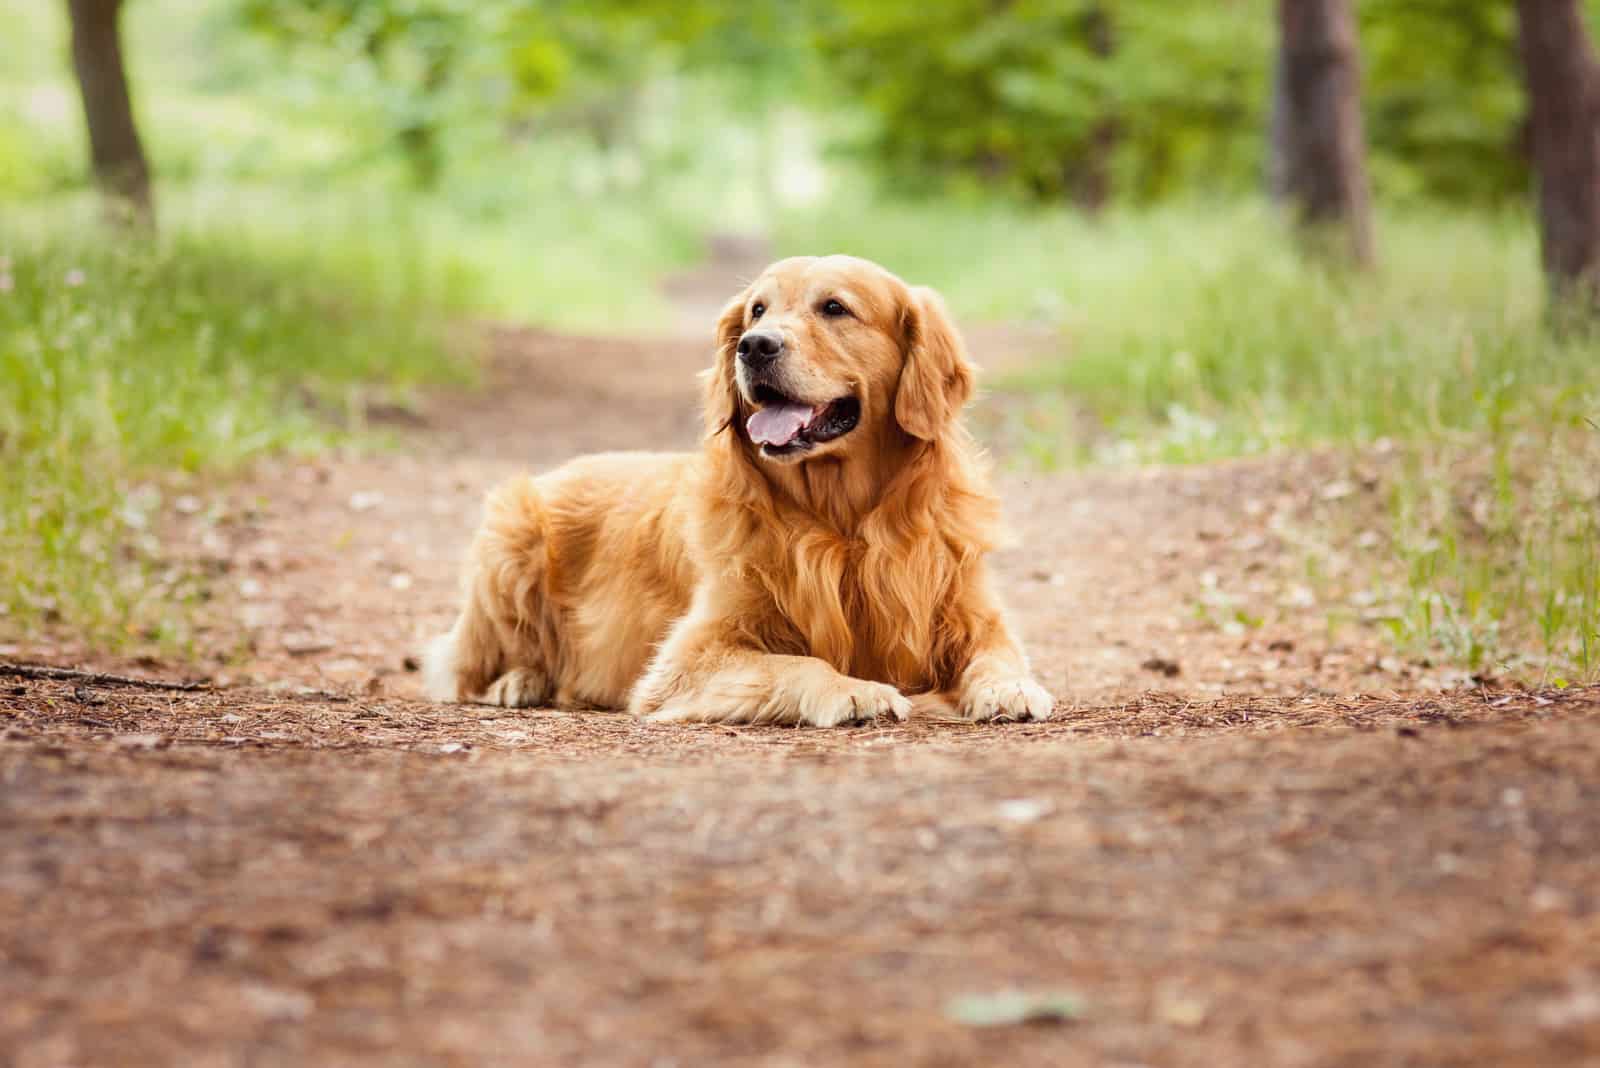 Why Is The Show Golden Retriever Special & Should You Get One?